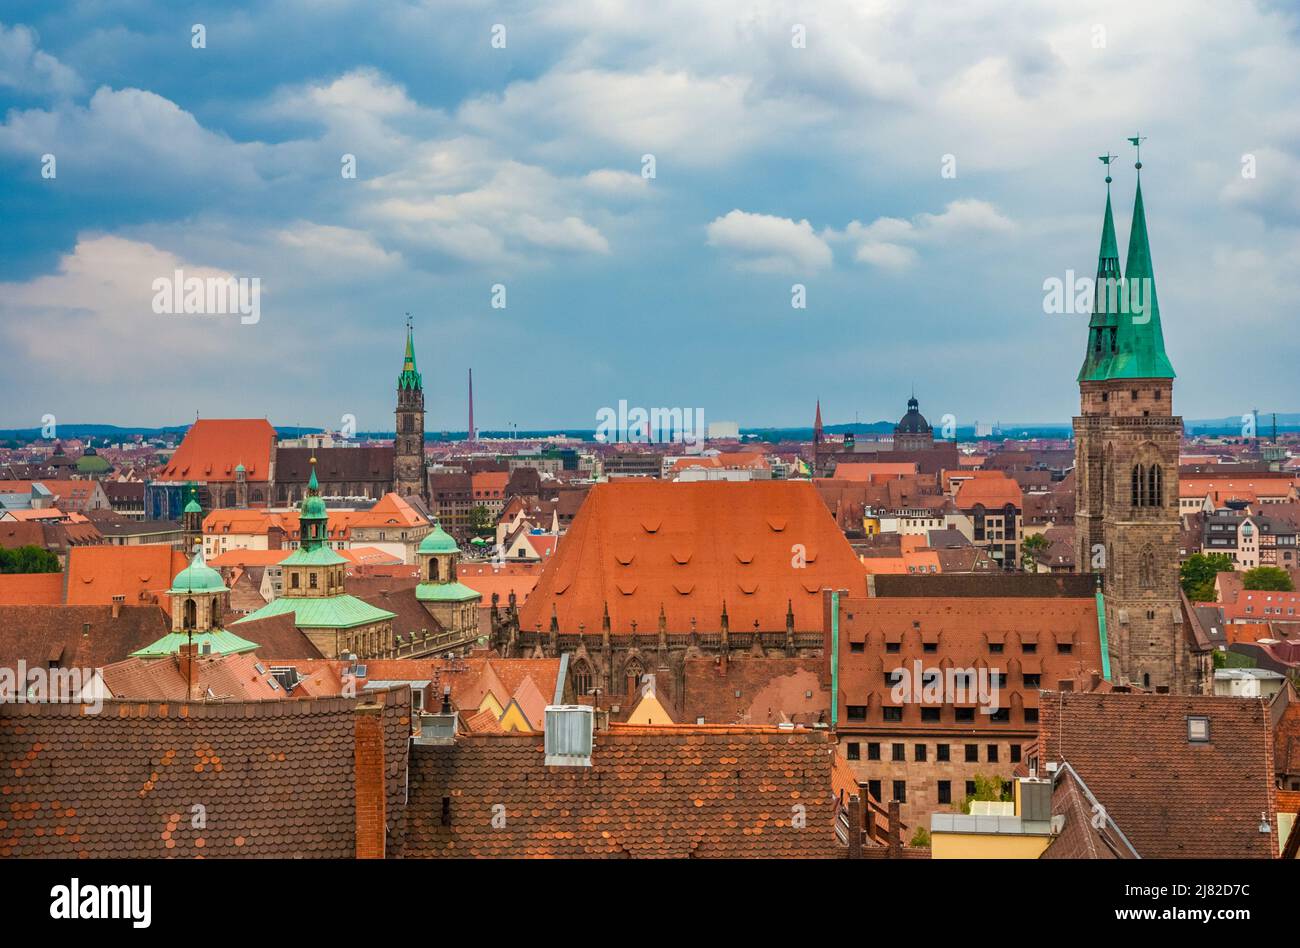 Gorgeous rooftop view over the historic city centre of Nürnberg, Germany. On the left stands the medieval church St. Lawrence (Lorenzkirche) and on... Stock Photo